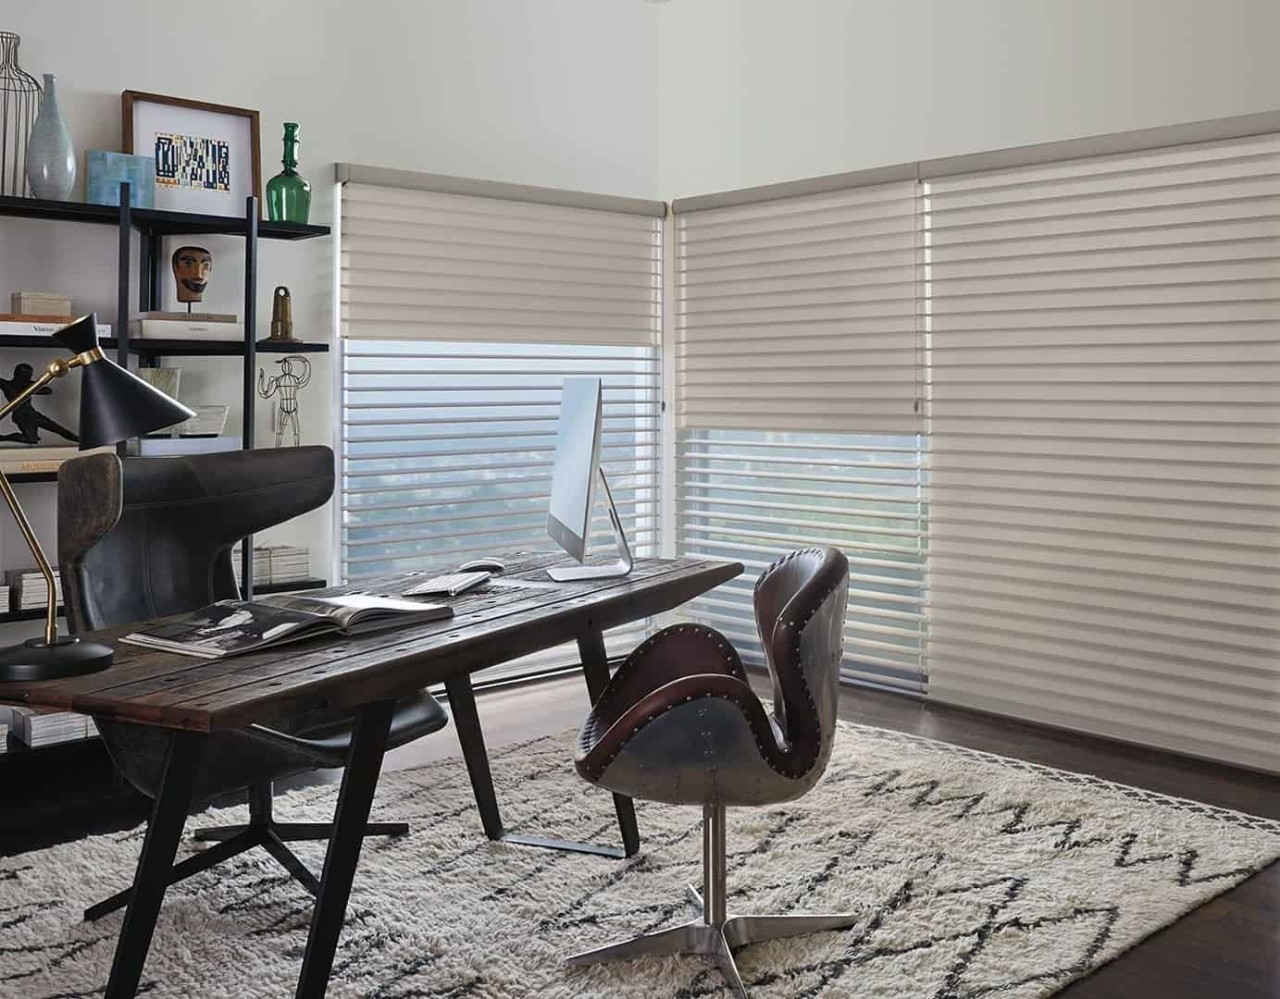 Hunter Douglas Silhouette® Sheer Shades hung at a window in a home office